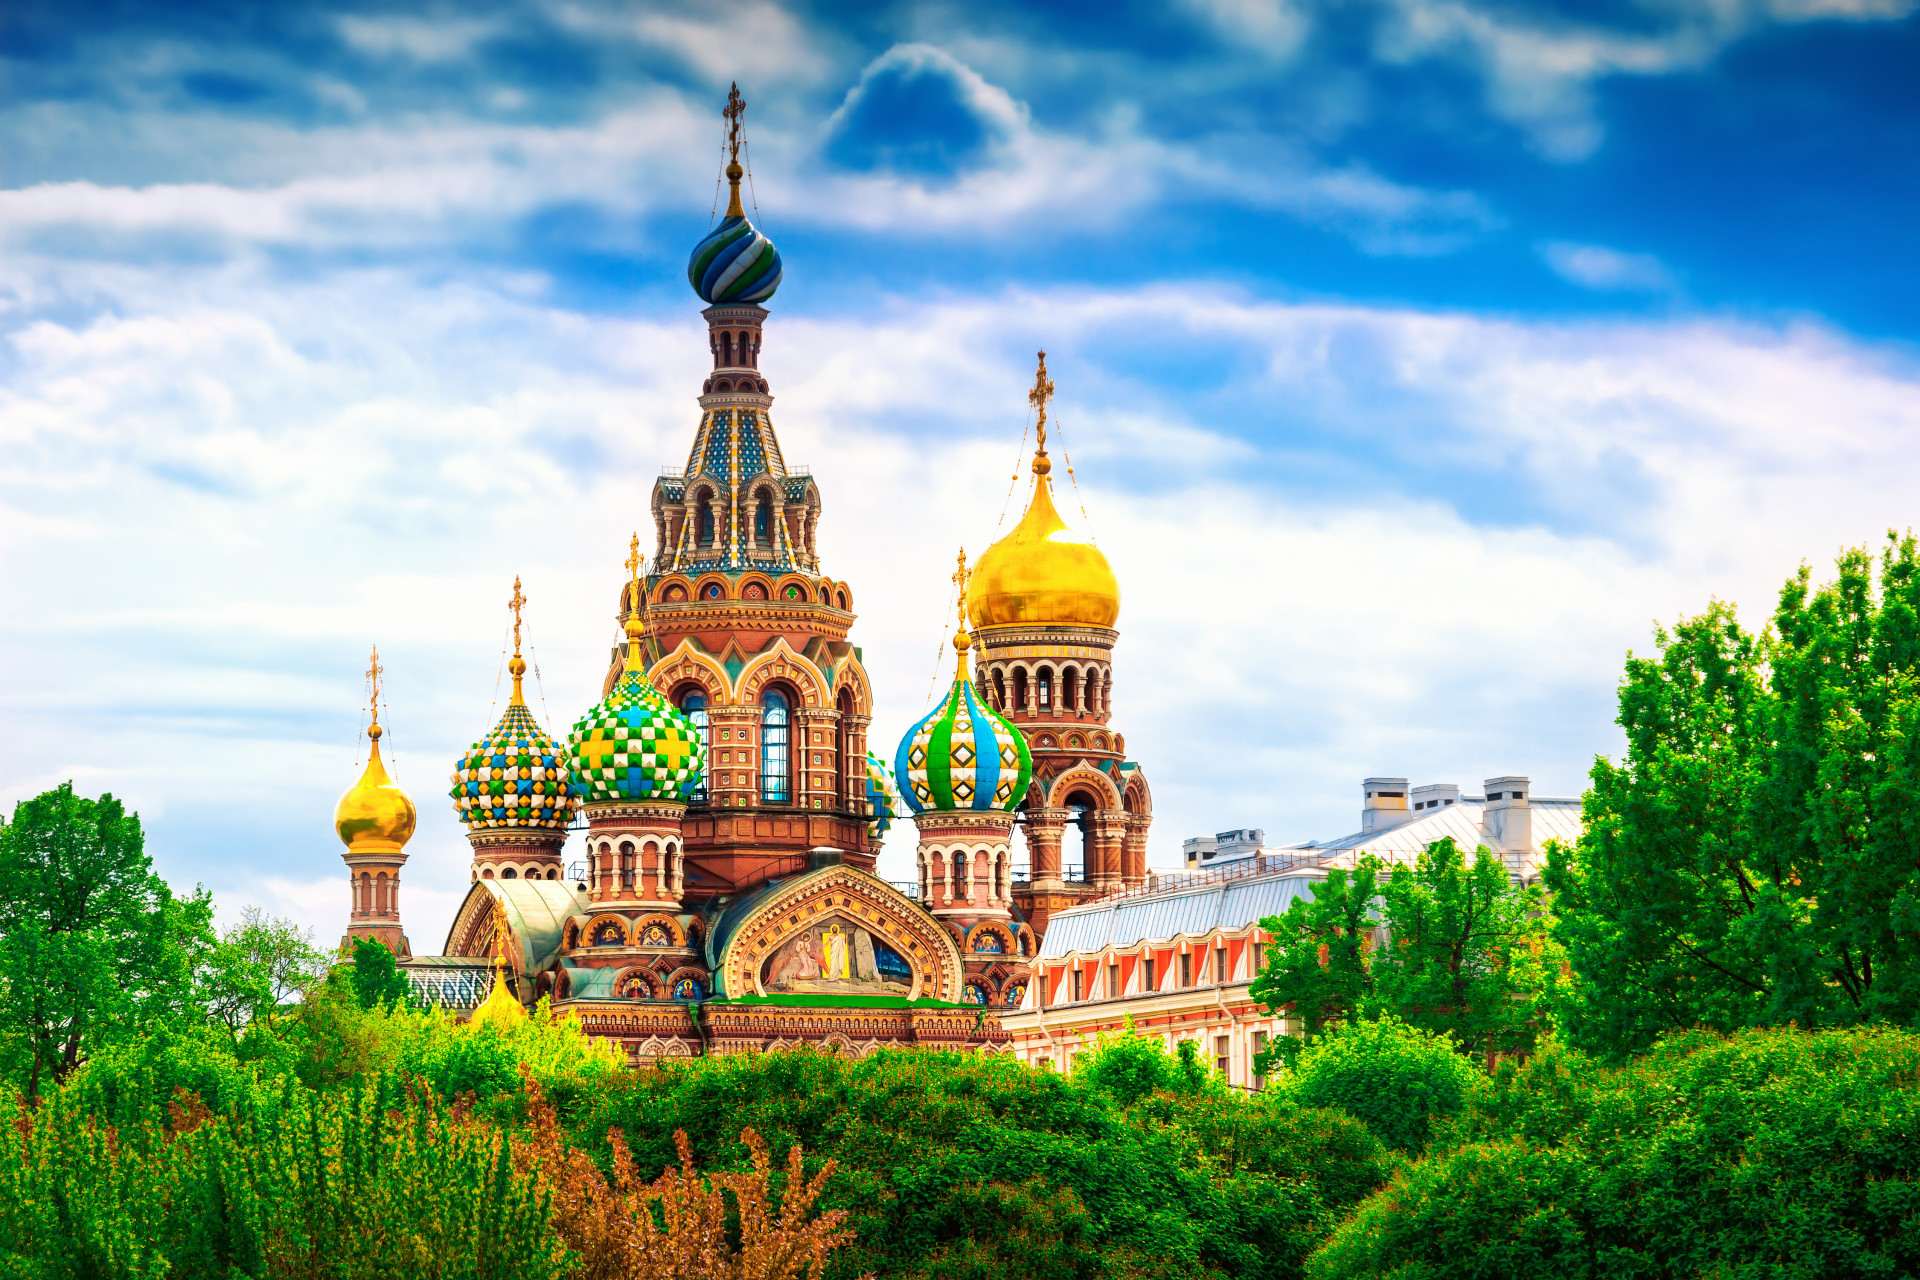 St. Petersburg is Russia's second largest city and it's known for its artistic heritage and tsar-period influence.<p>You may also like:<a href="https://www.starsinsider.com/n/491942?utm_source=msn.com&utm_medium=display&utm_campaign=referral_description&utm_content=210974v3en-ae"> The most beautiful women of the ‘70s</a></p>